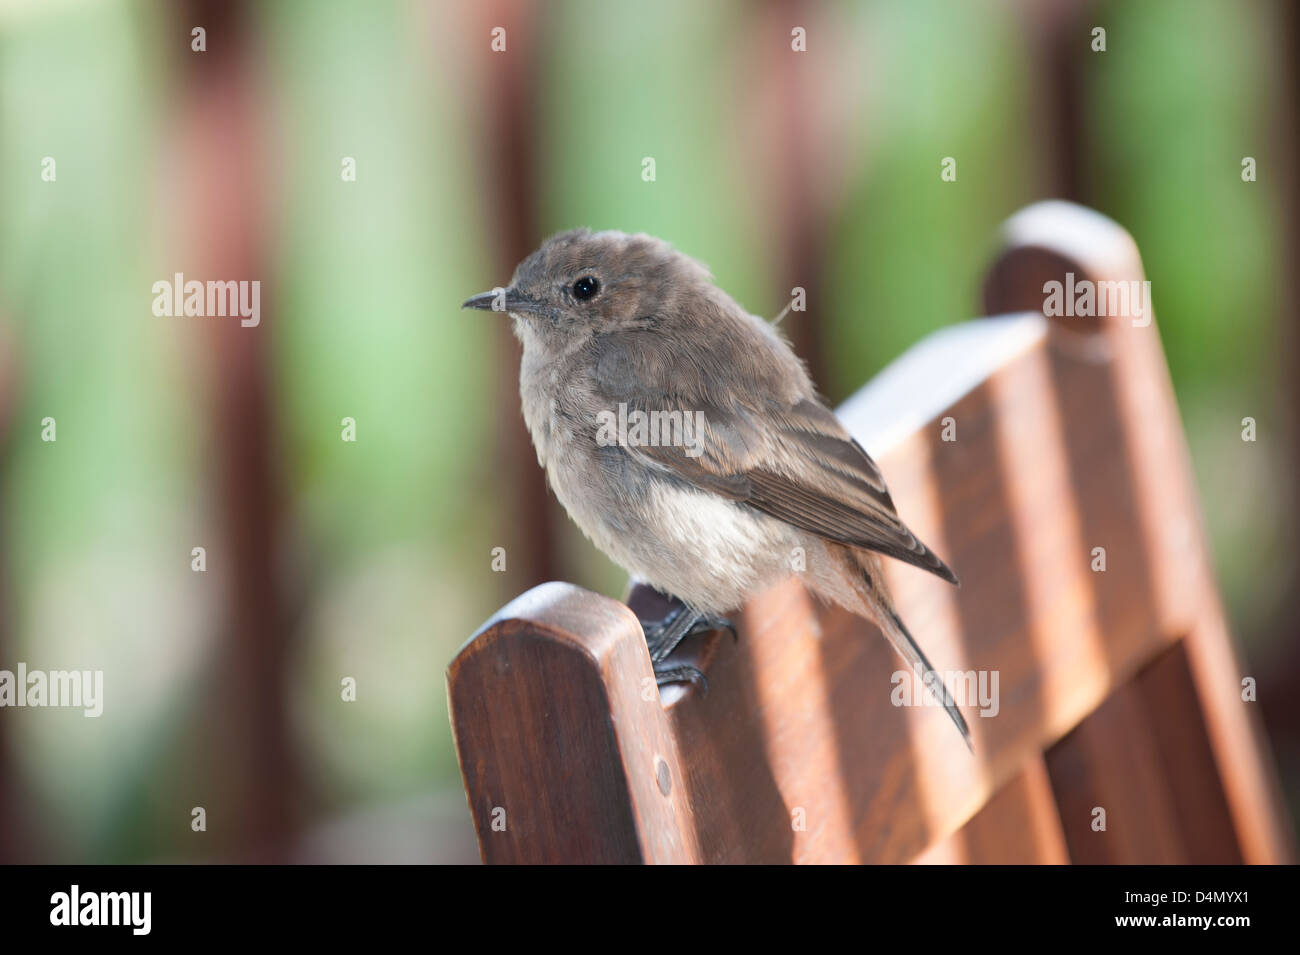 Young Familiar Chat bird. Cercomela familiaris South African wild bird sitting chair Stock Photo